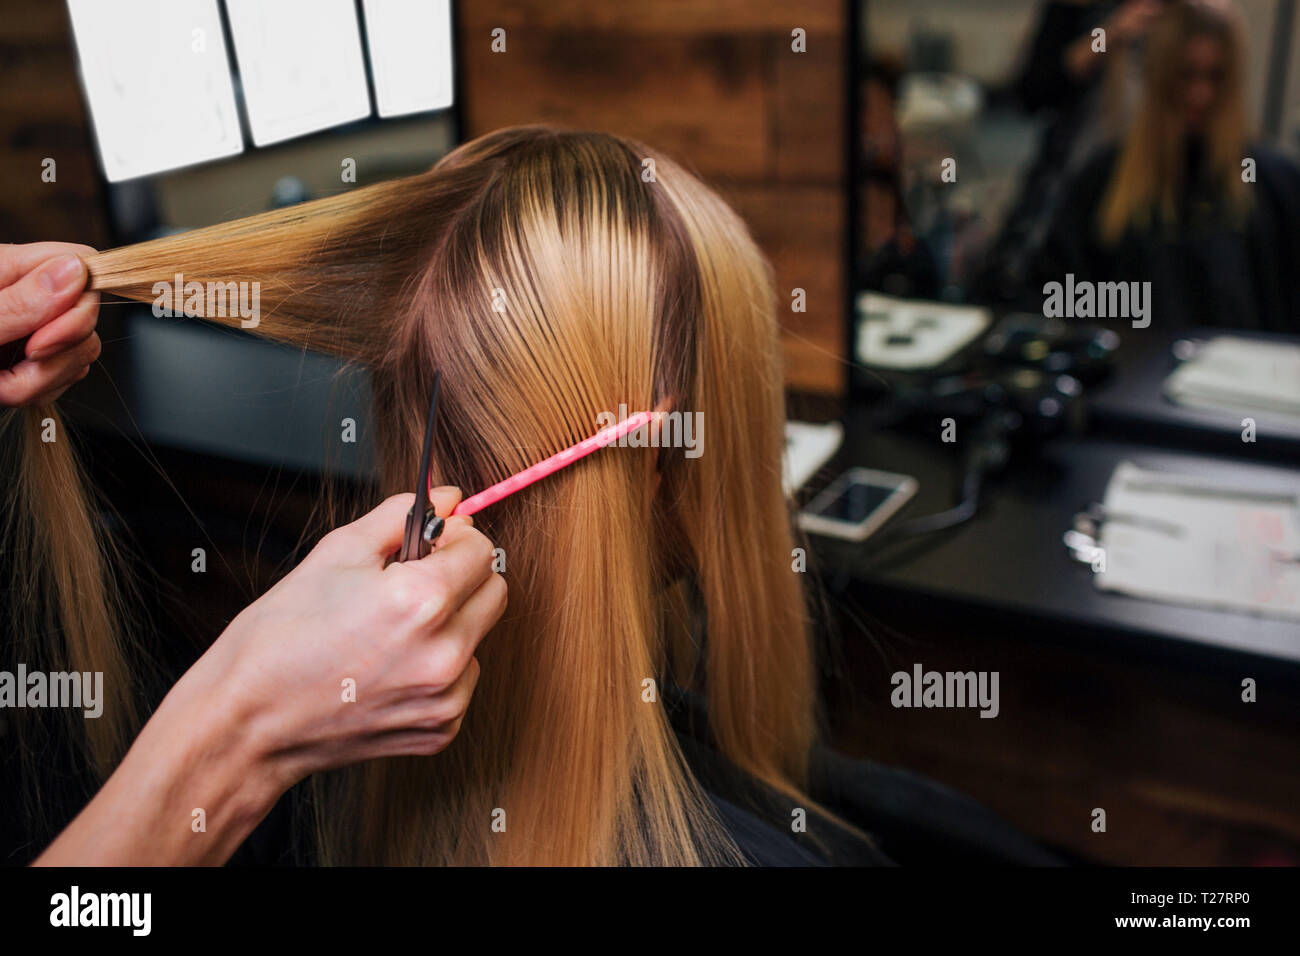 Hairstylist hands holding strand of blonde hair while combing it before haircut in salon Stock Photo